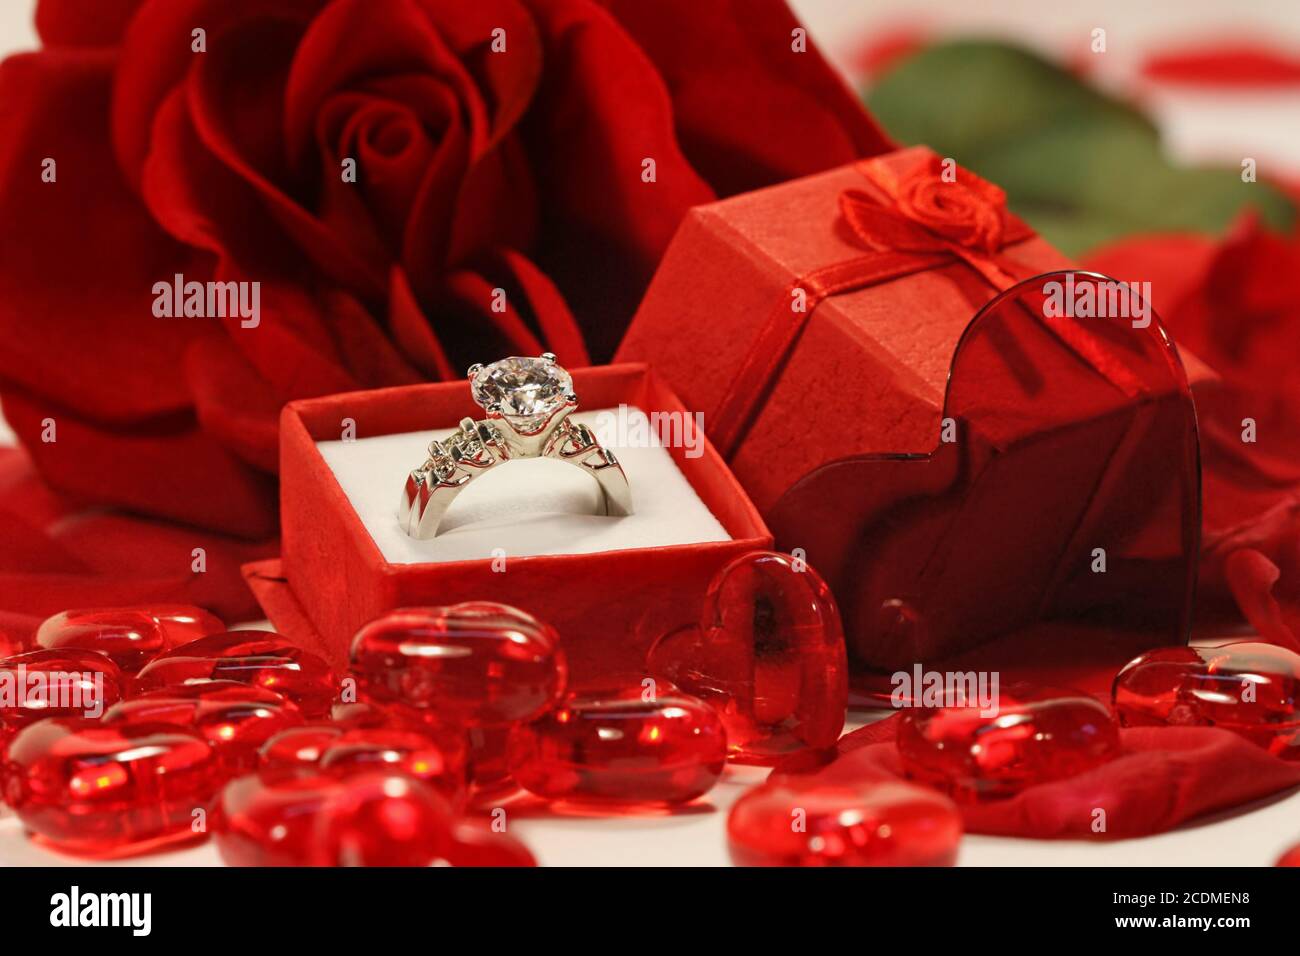 Red hearts and rose with wedding ring Stock Photo